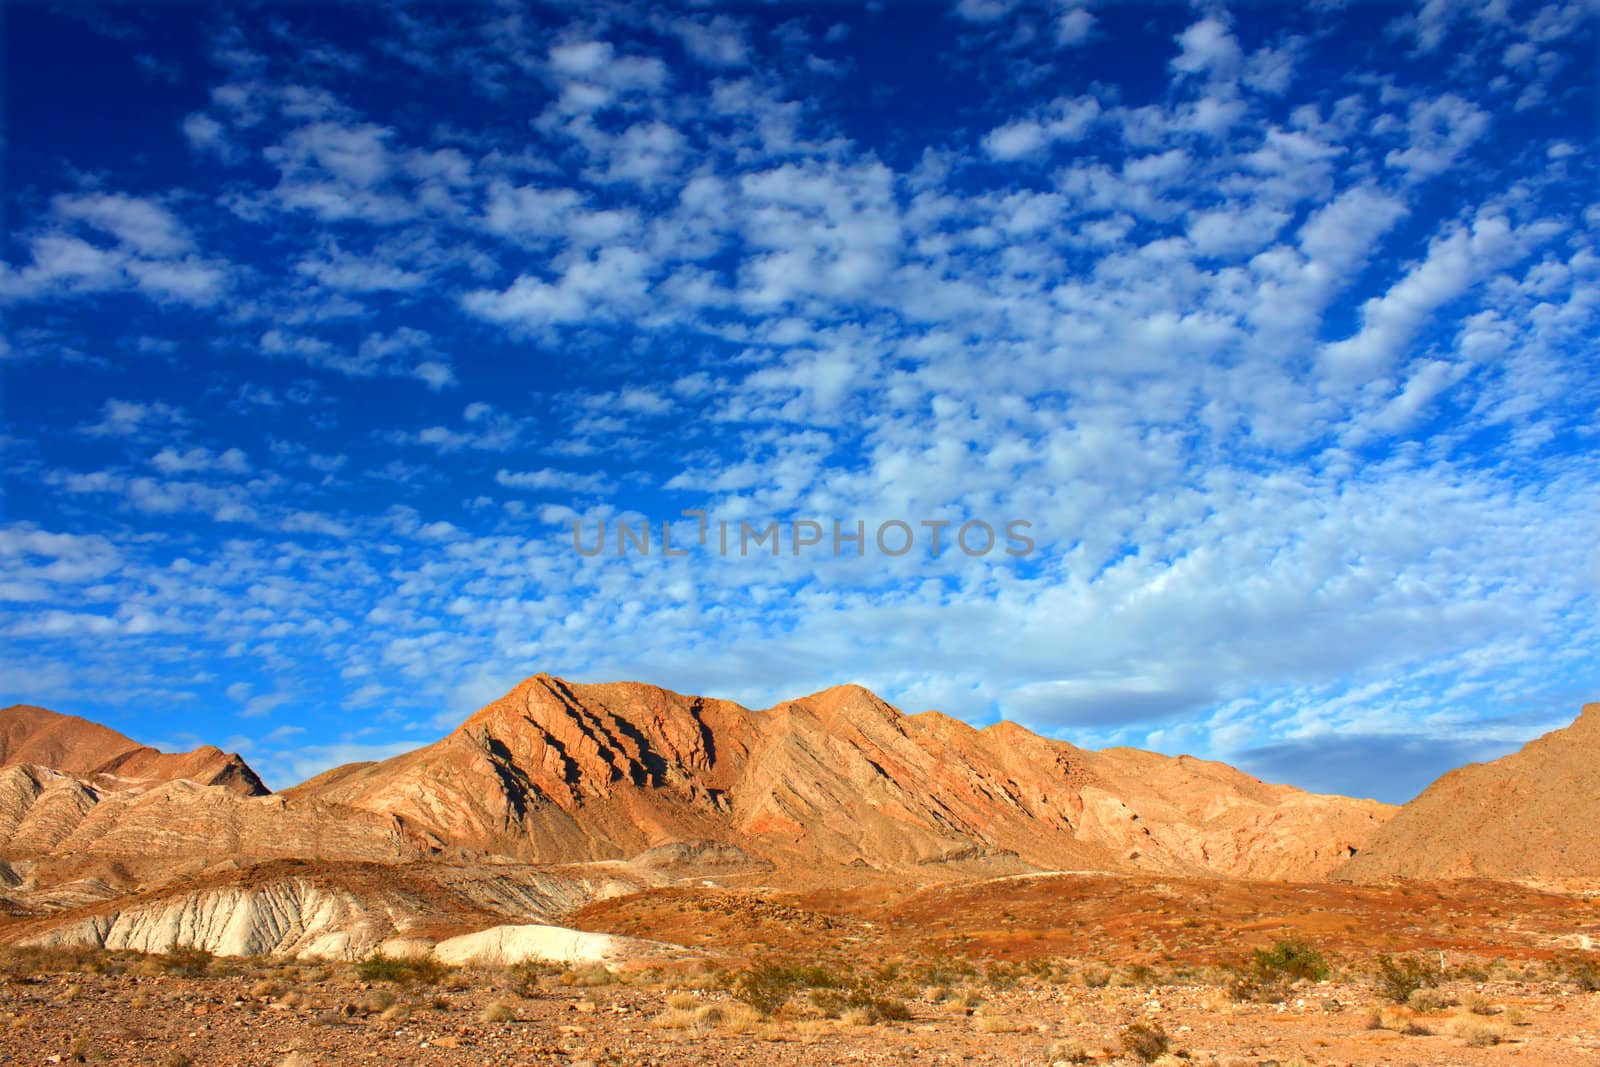 Lake Mead National Recreation Area by Wirepec